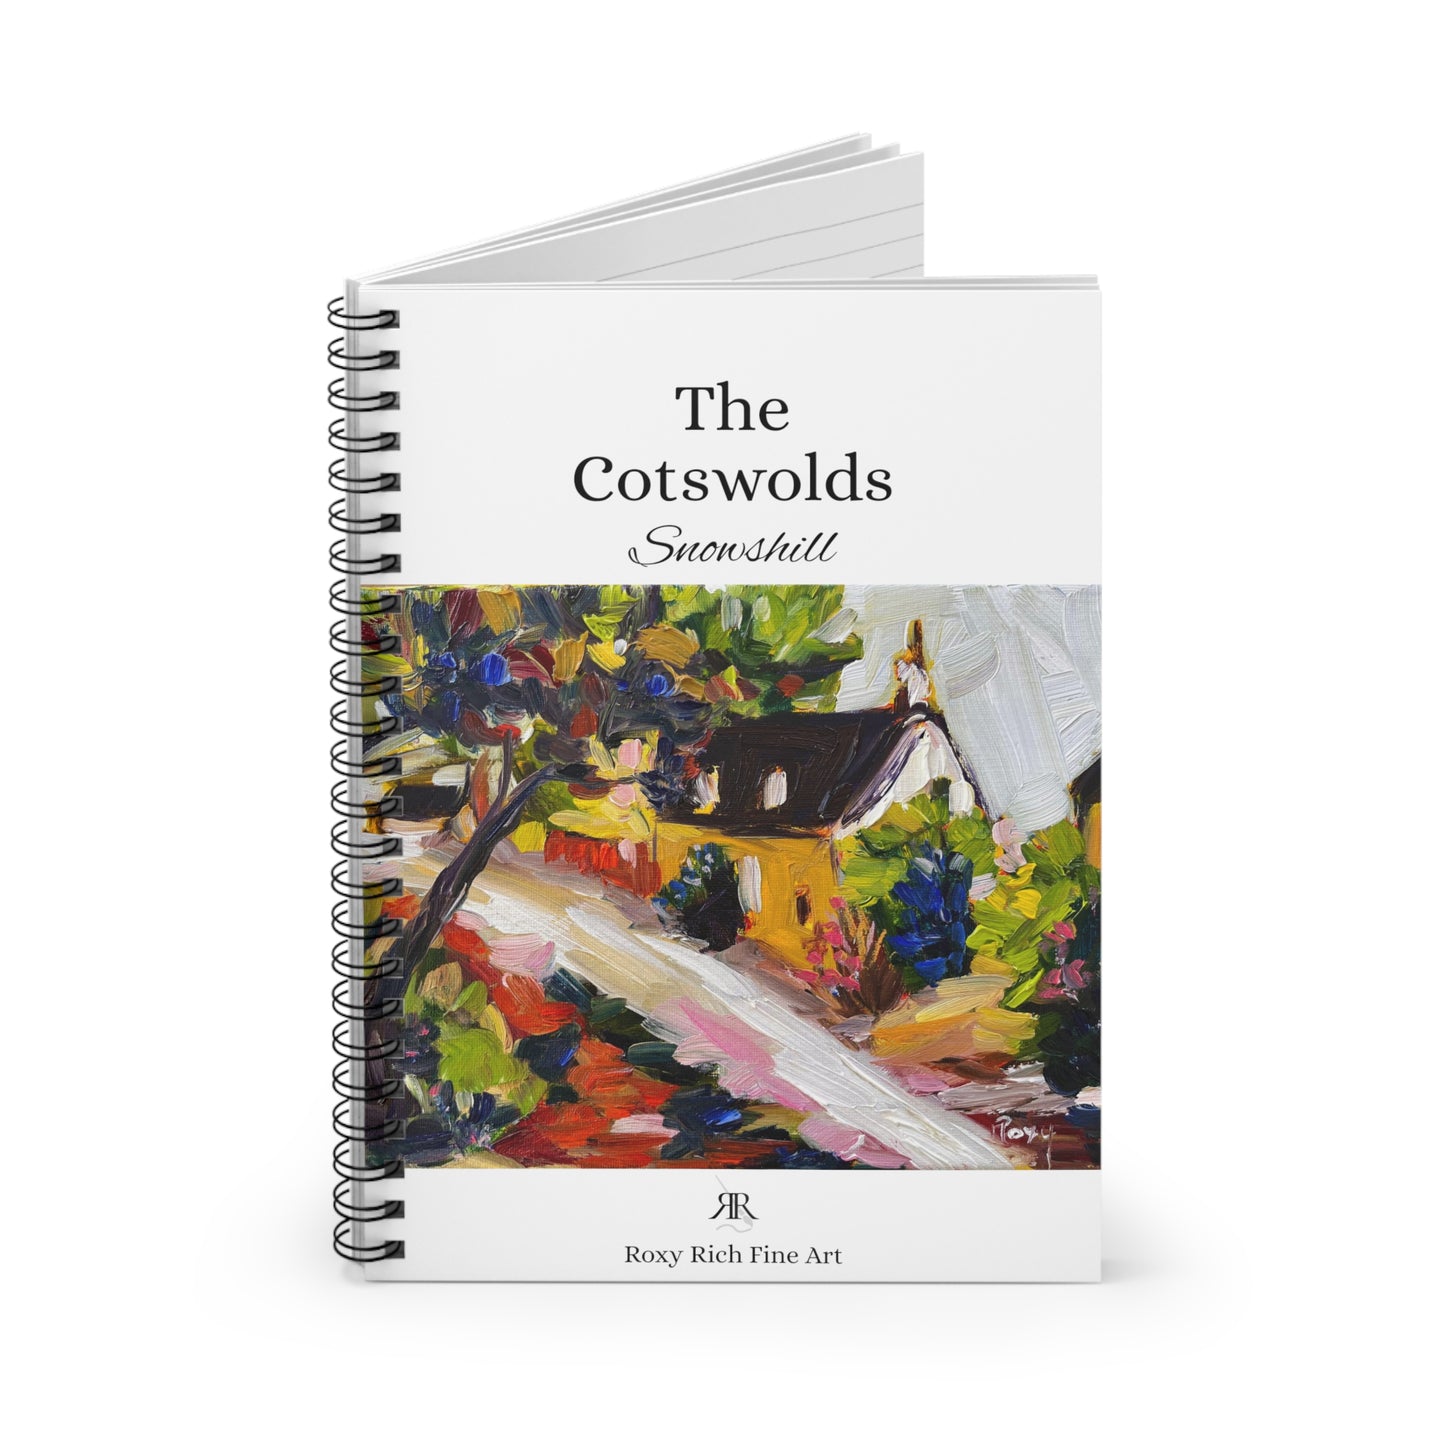 Snowshill "The Cotswolds" Spiral Notebook